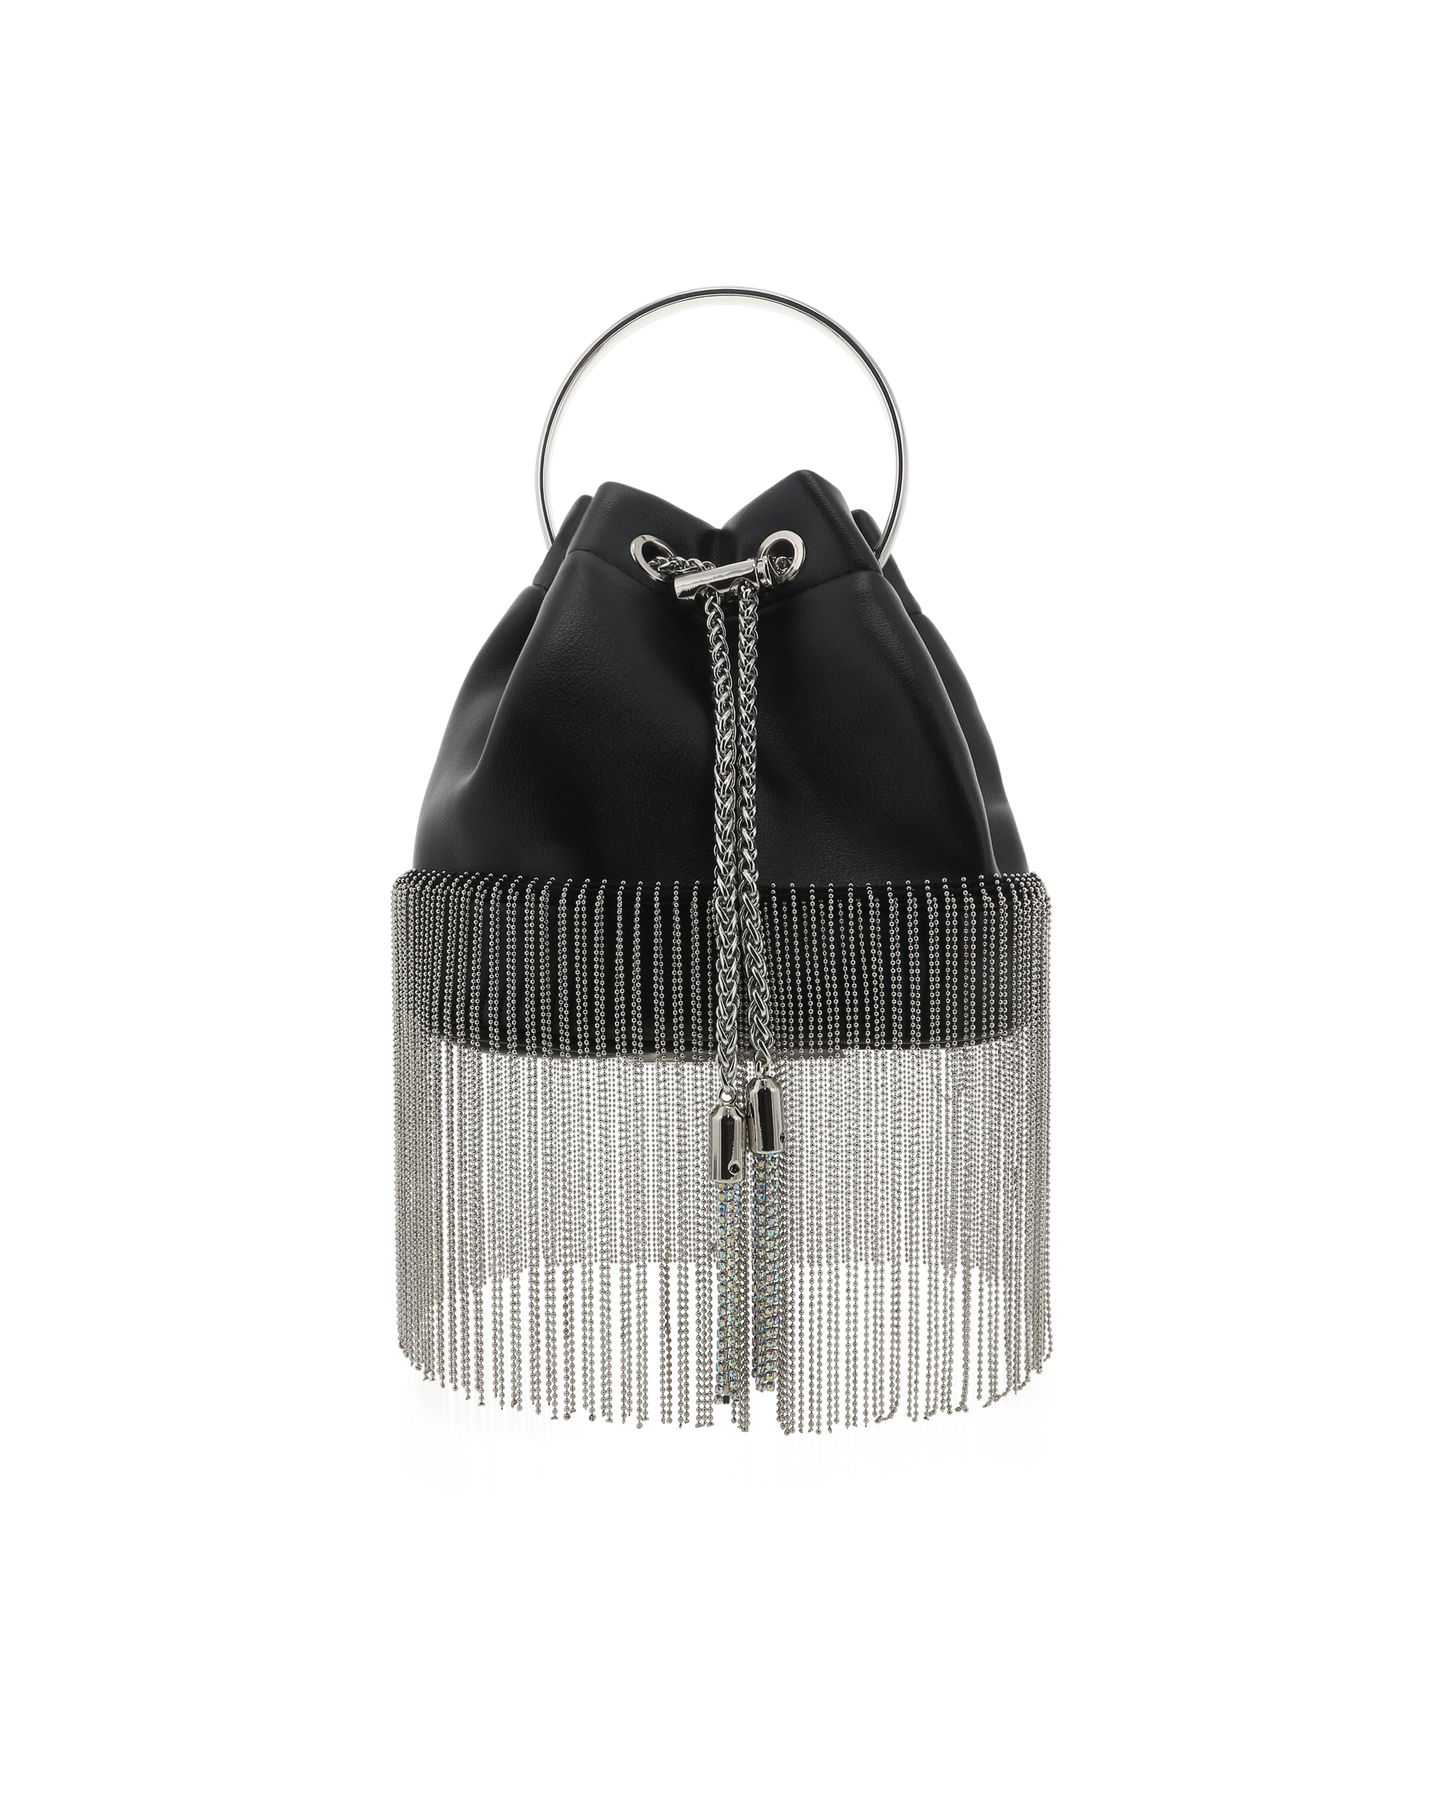 Black purse with a drawstring top closure, silver fringe along the bottom and a silver top handle